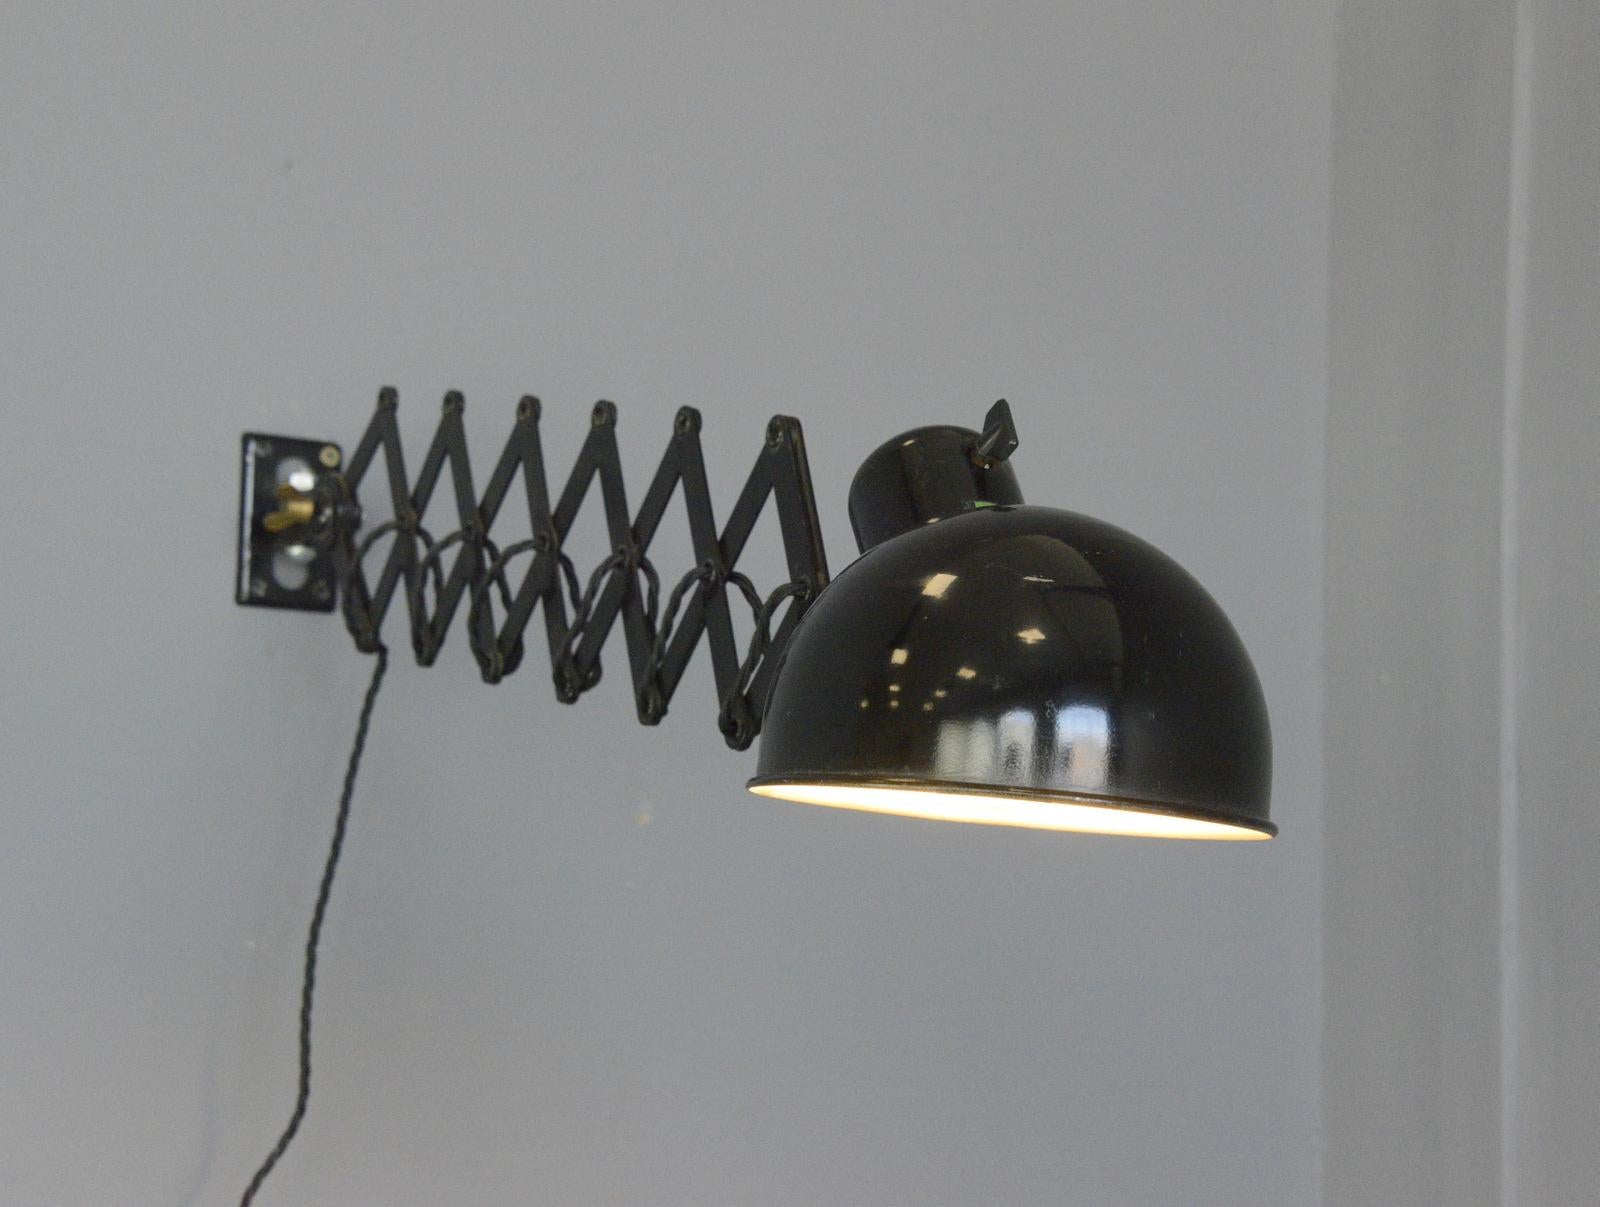 Wall-mounted scissor lamp by Koranda, circa 1930s

- Extendable scissor mechanism
- Takes E27 fitting bulbs
- Designed by Christian Dell for Koranda
- Austrian, 1930s
- Size: 17cm wide 
- Extends up to 90cm from the wall

Condition